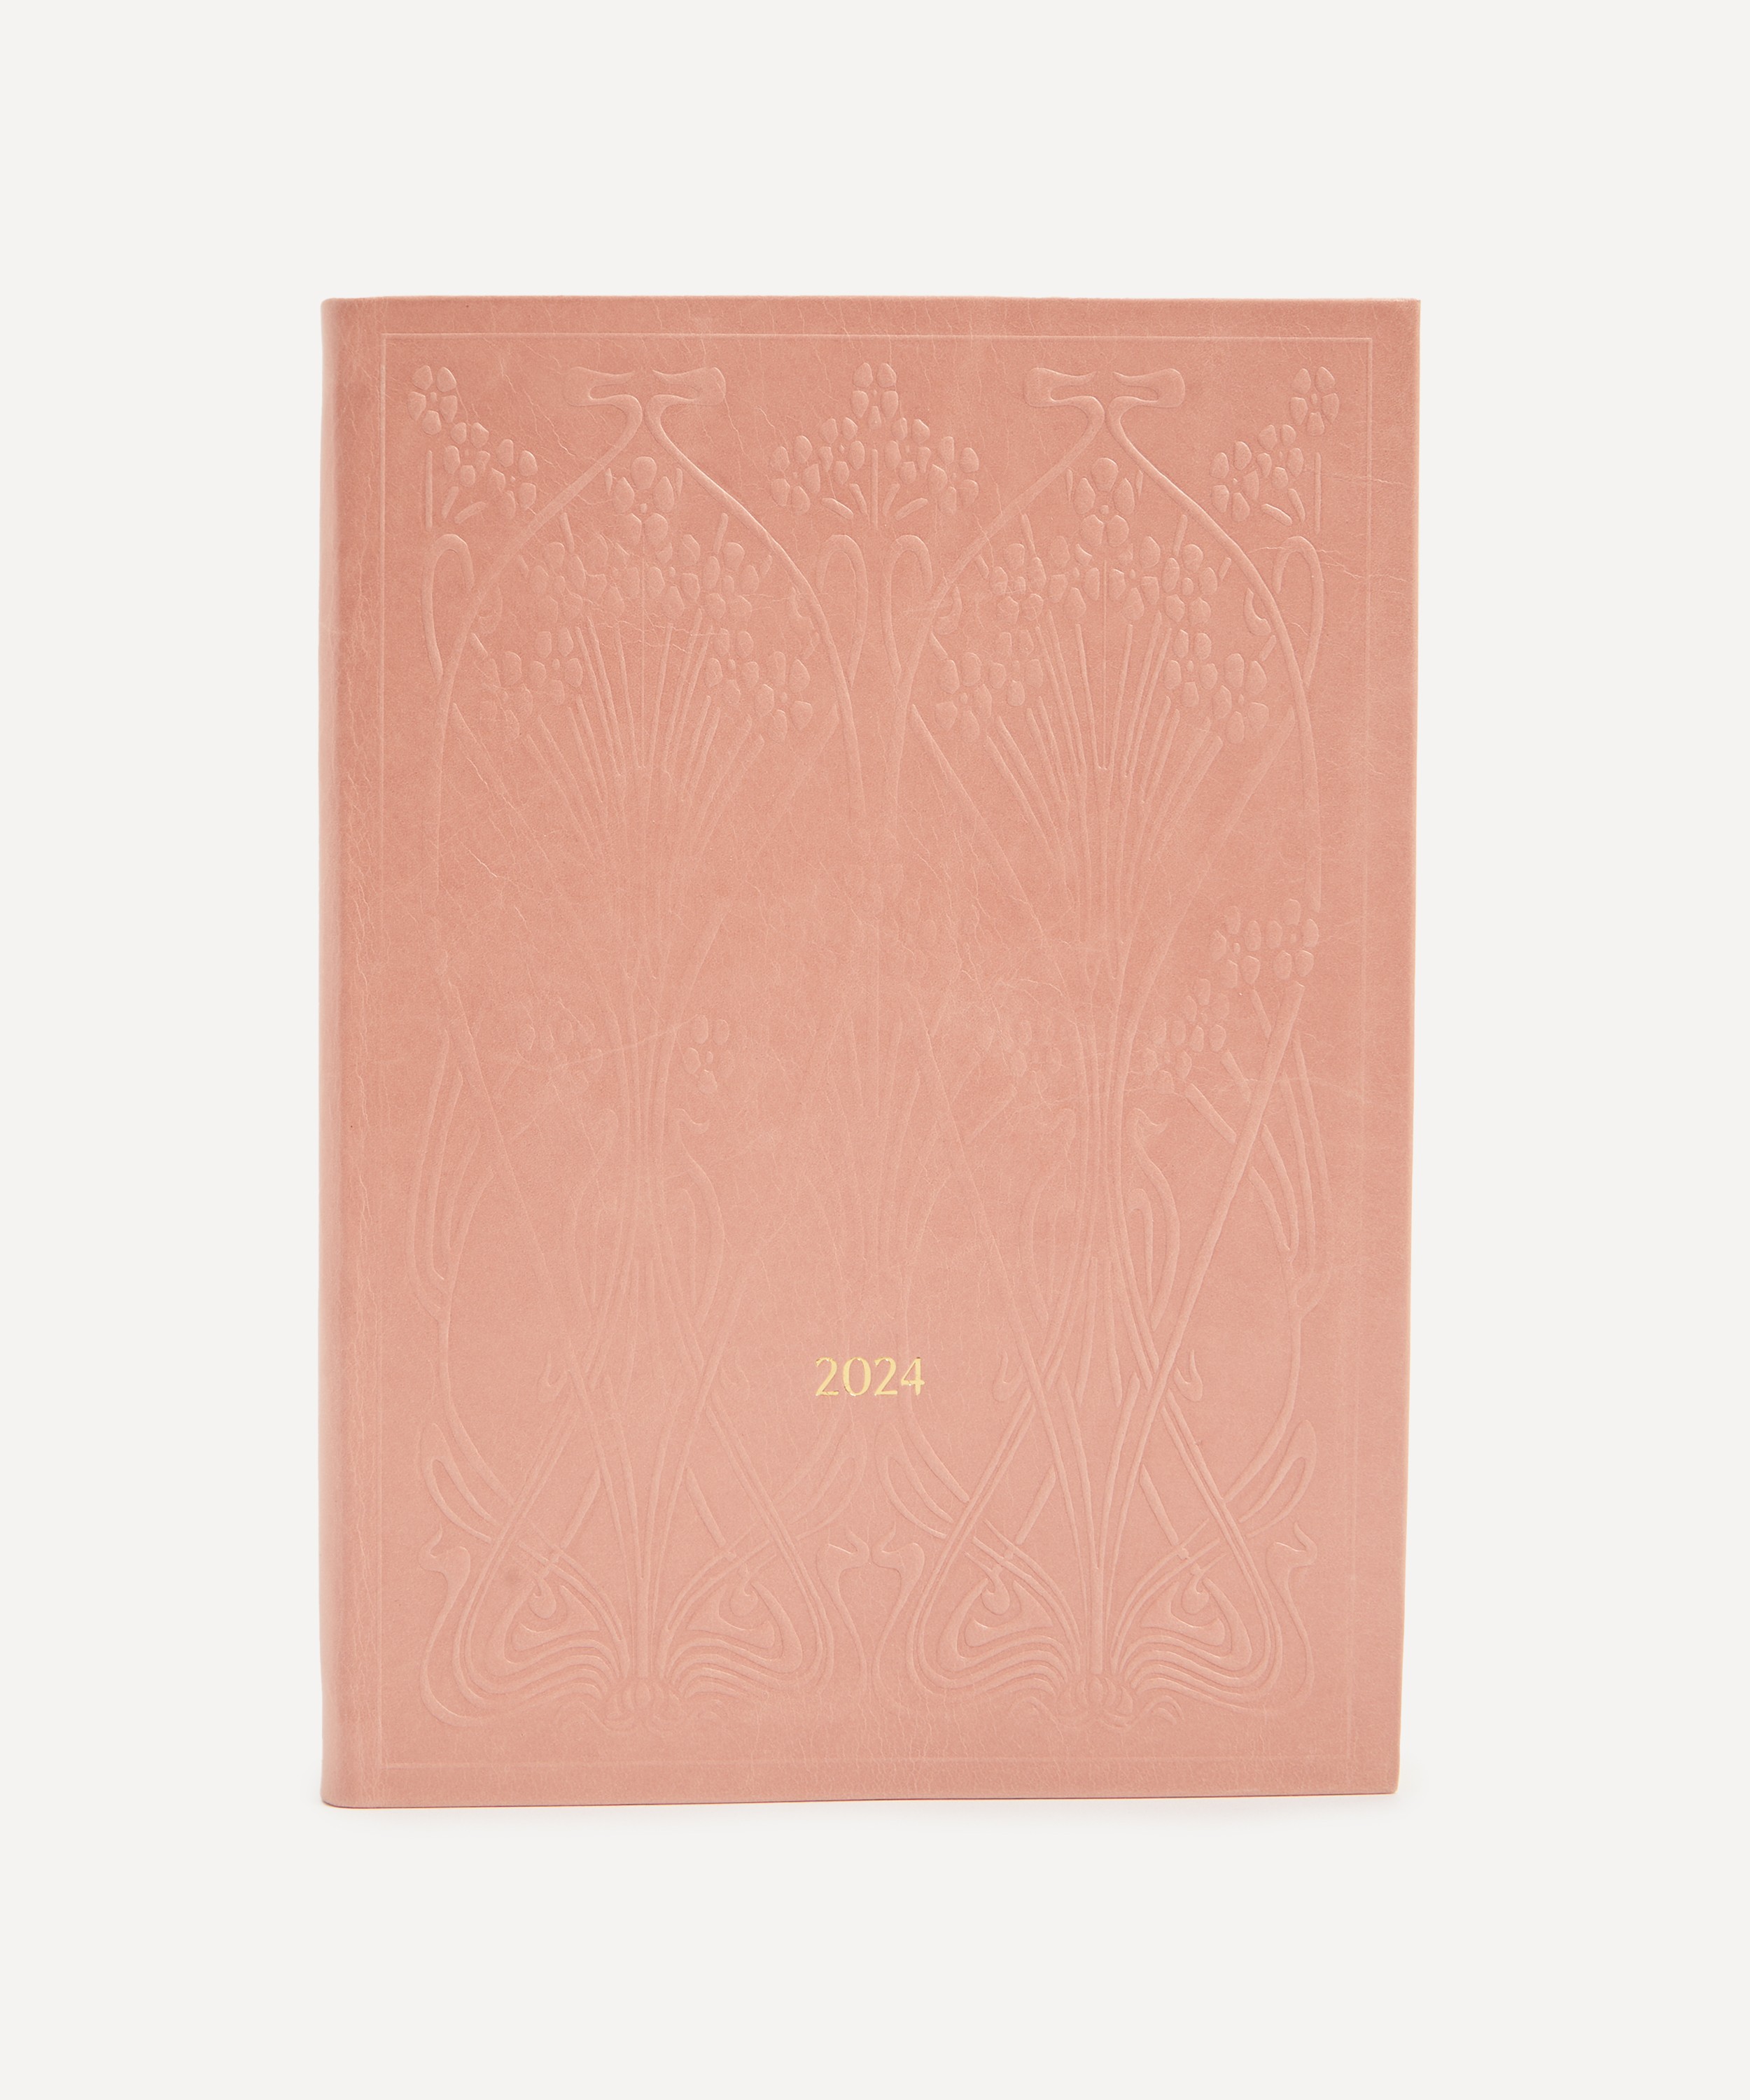 Mini agenda -cover with address book and notepad, for the 150